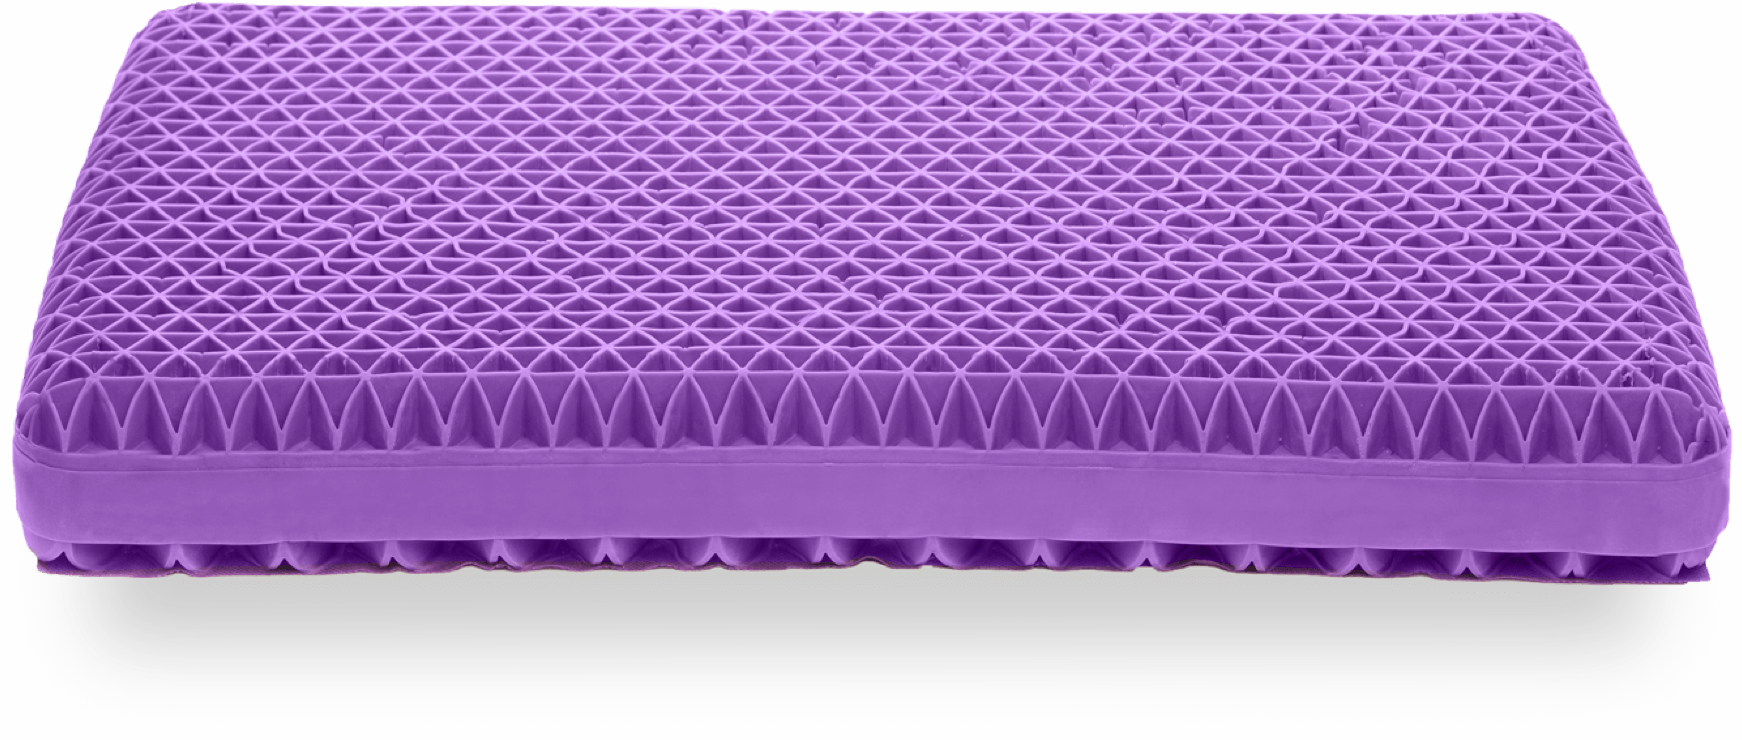 clipart bed purple bed